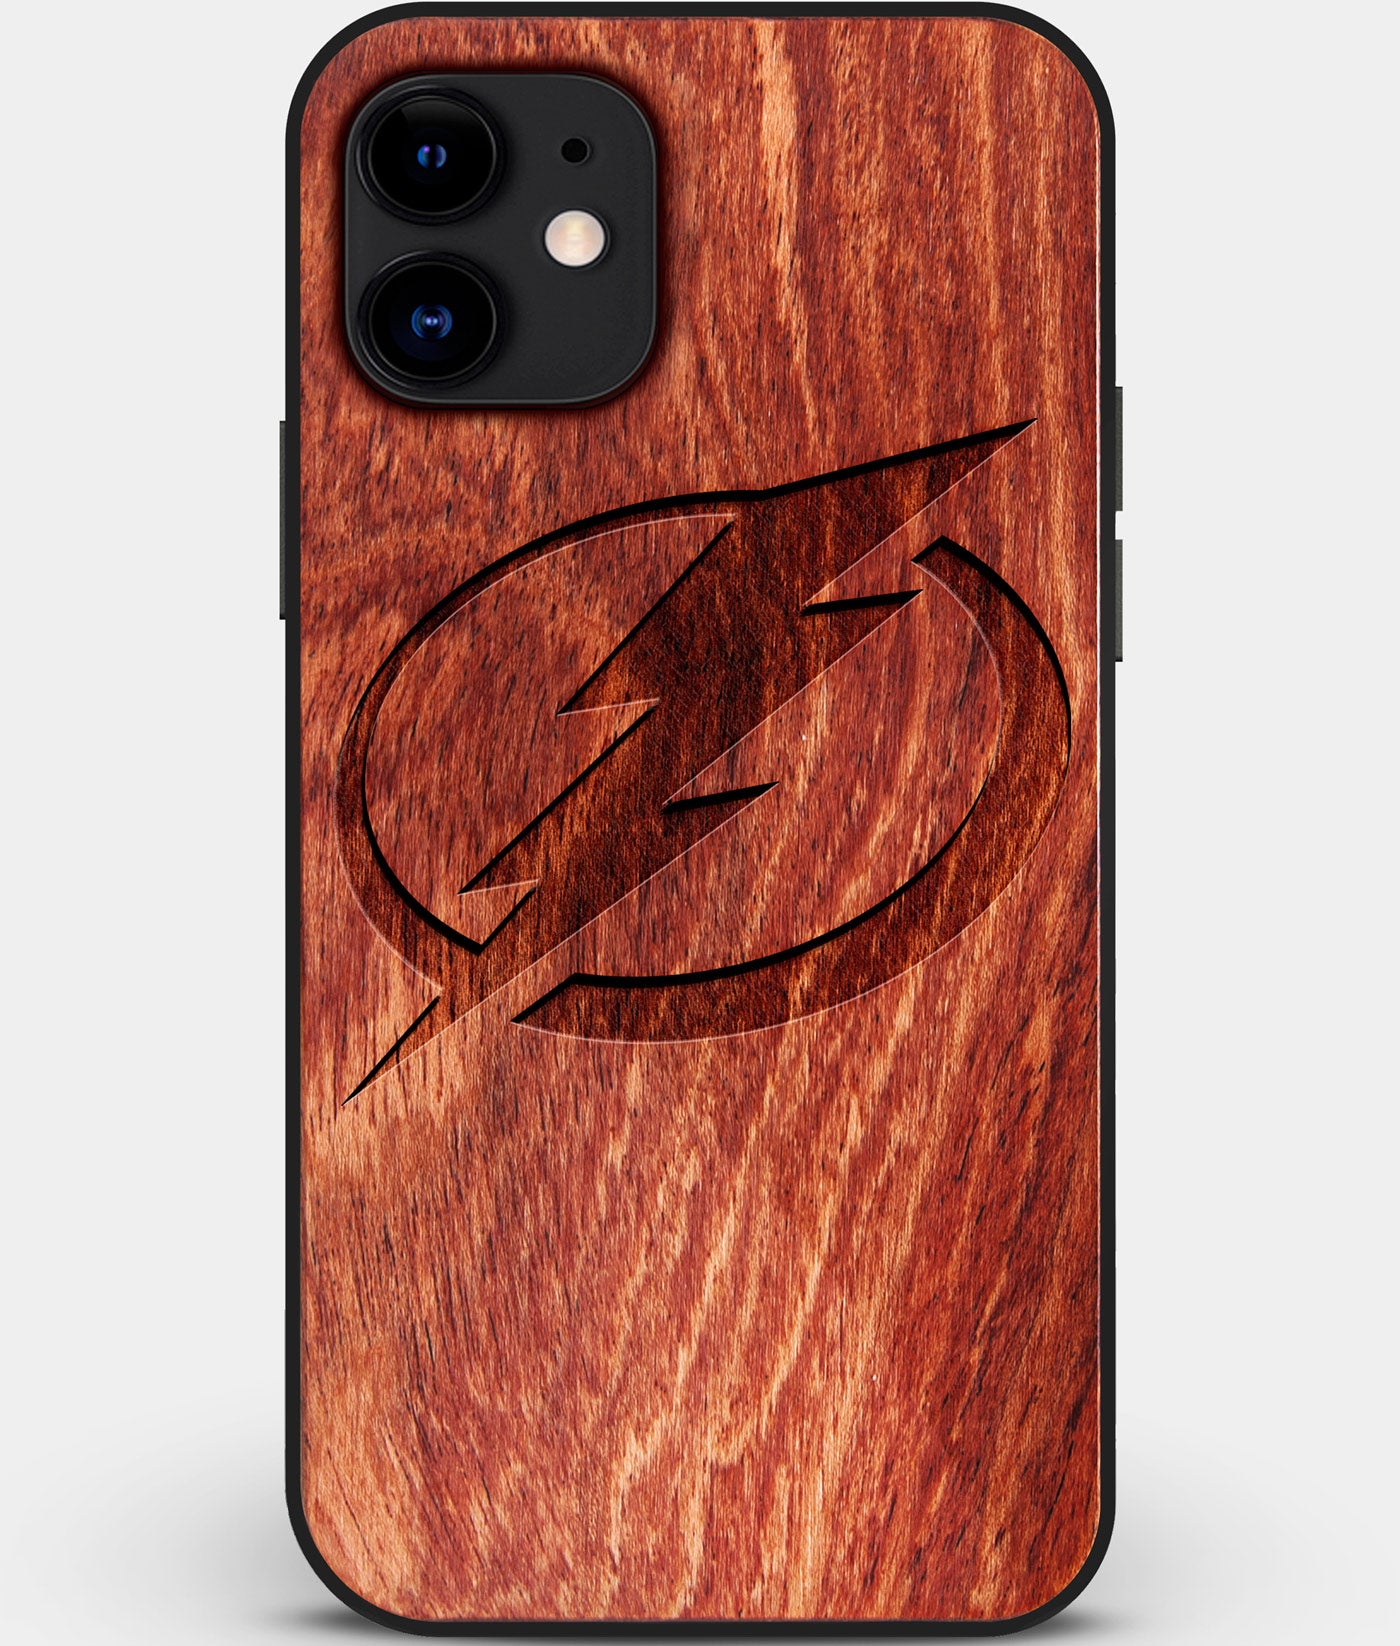 Custom Carved Wood Tampa Bay Lightning iPhone 12 Case | Personalized Mahogany Wood Tampa Bay Lightning Cover, Birthday Gift, Gifts For Him, Monogrammed Gift For Fan | by Engraved In Nature